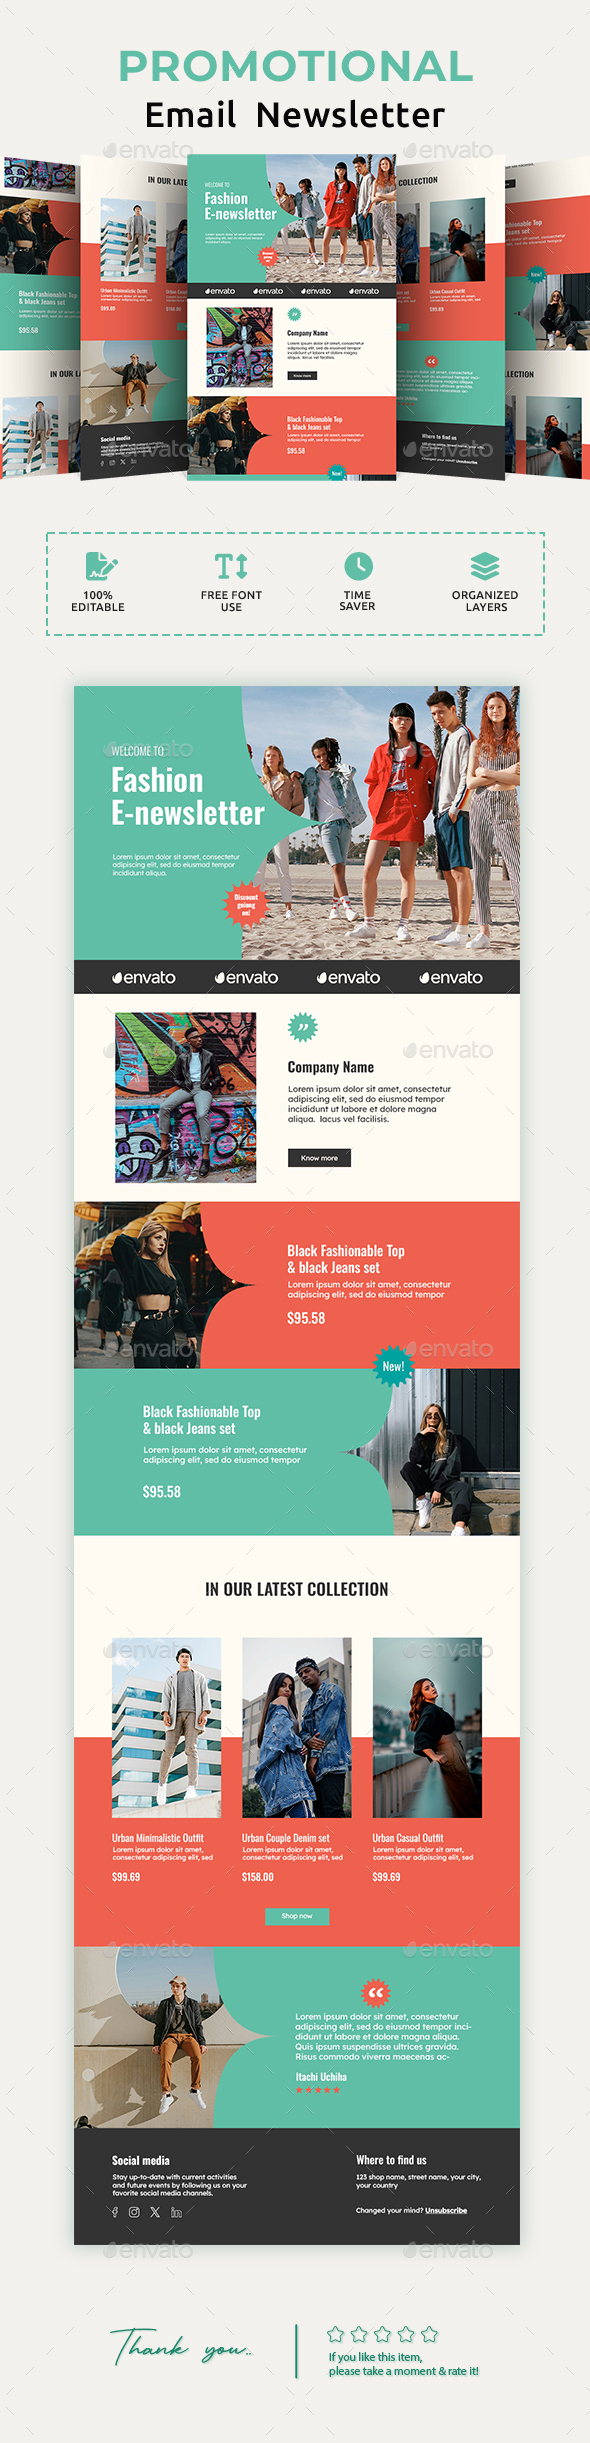 Lifestyle Fashion Email Newsletter PSD Template